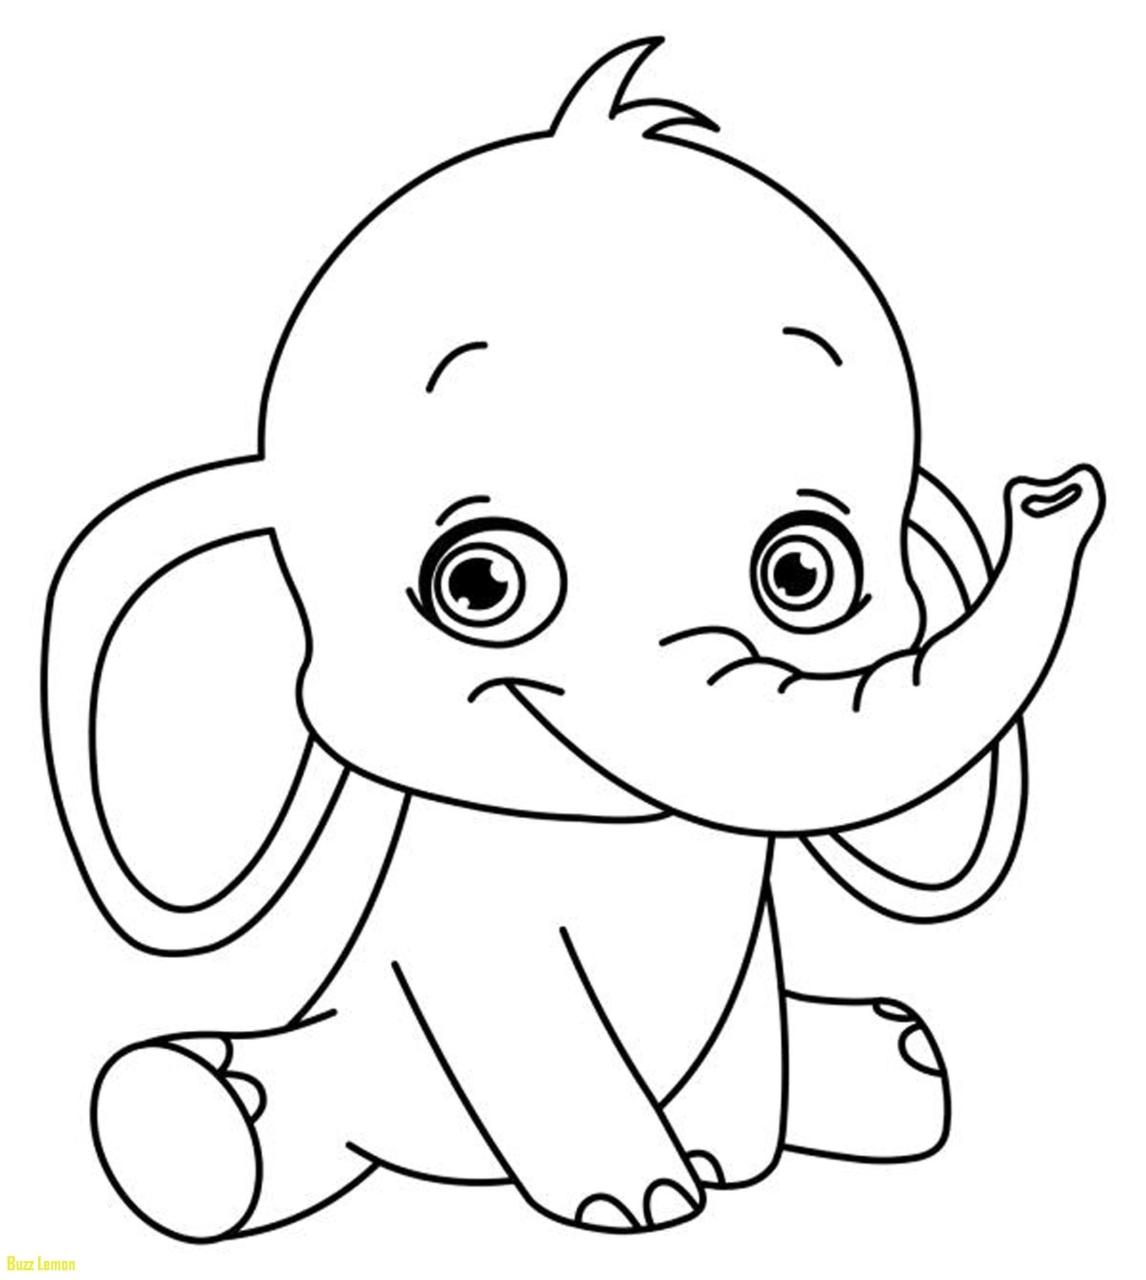 List Of Coloring Pages Of Animals Pdf Ideas